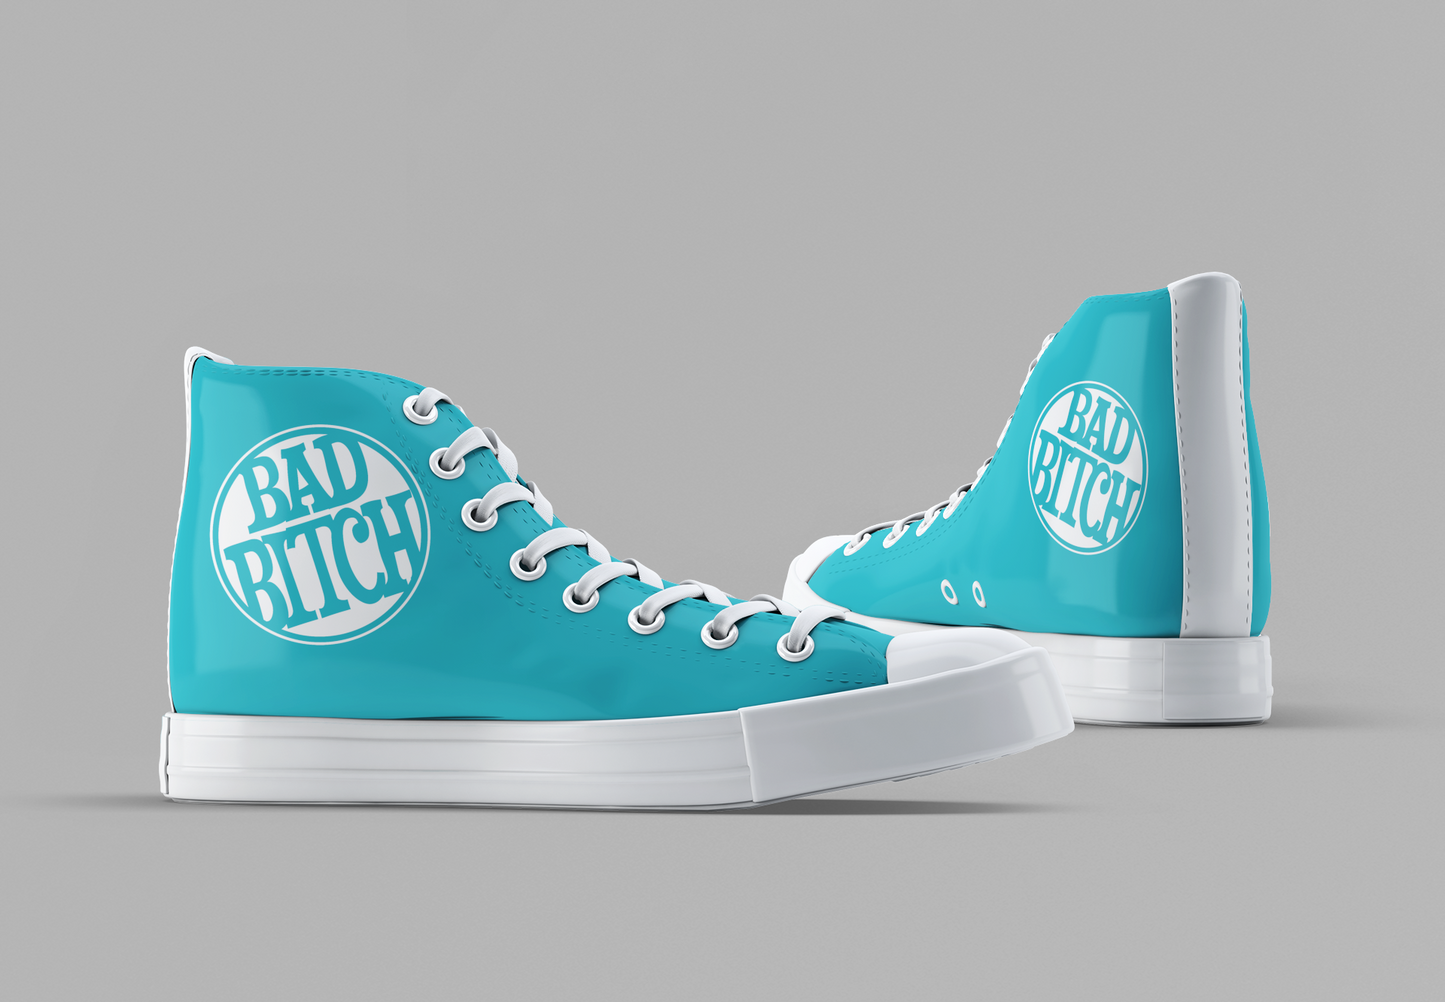 Bad Bitch [Turquoise] - Women's High Top Sneakers